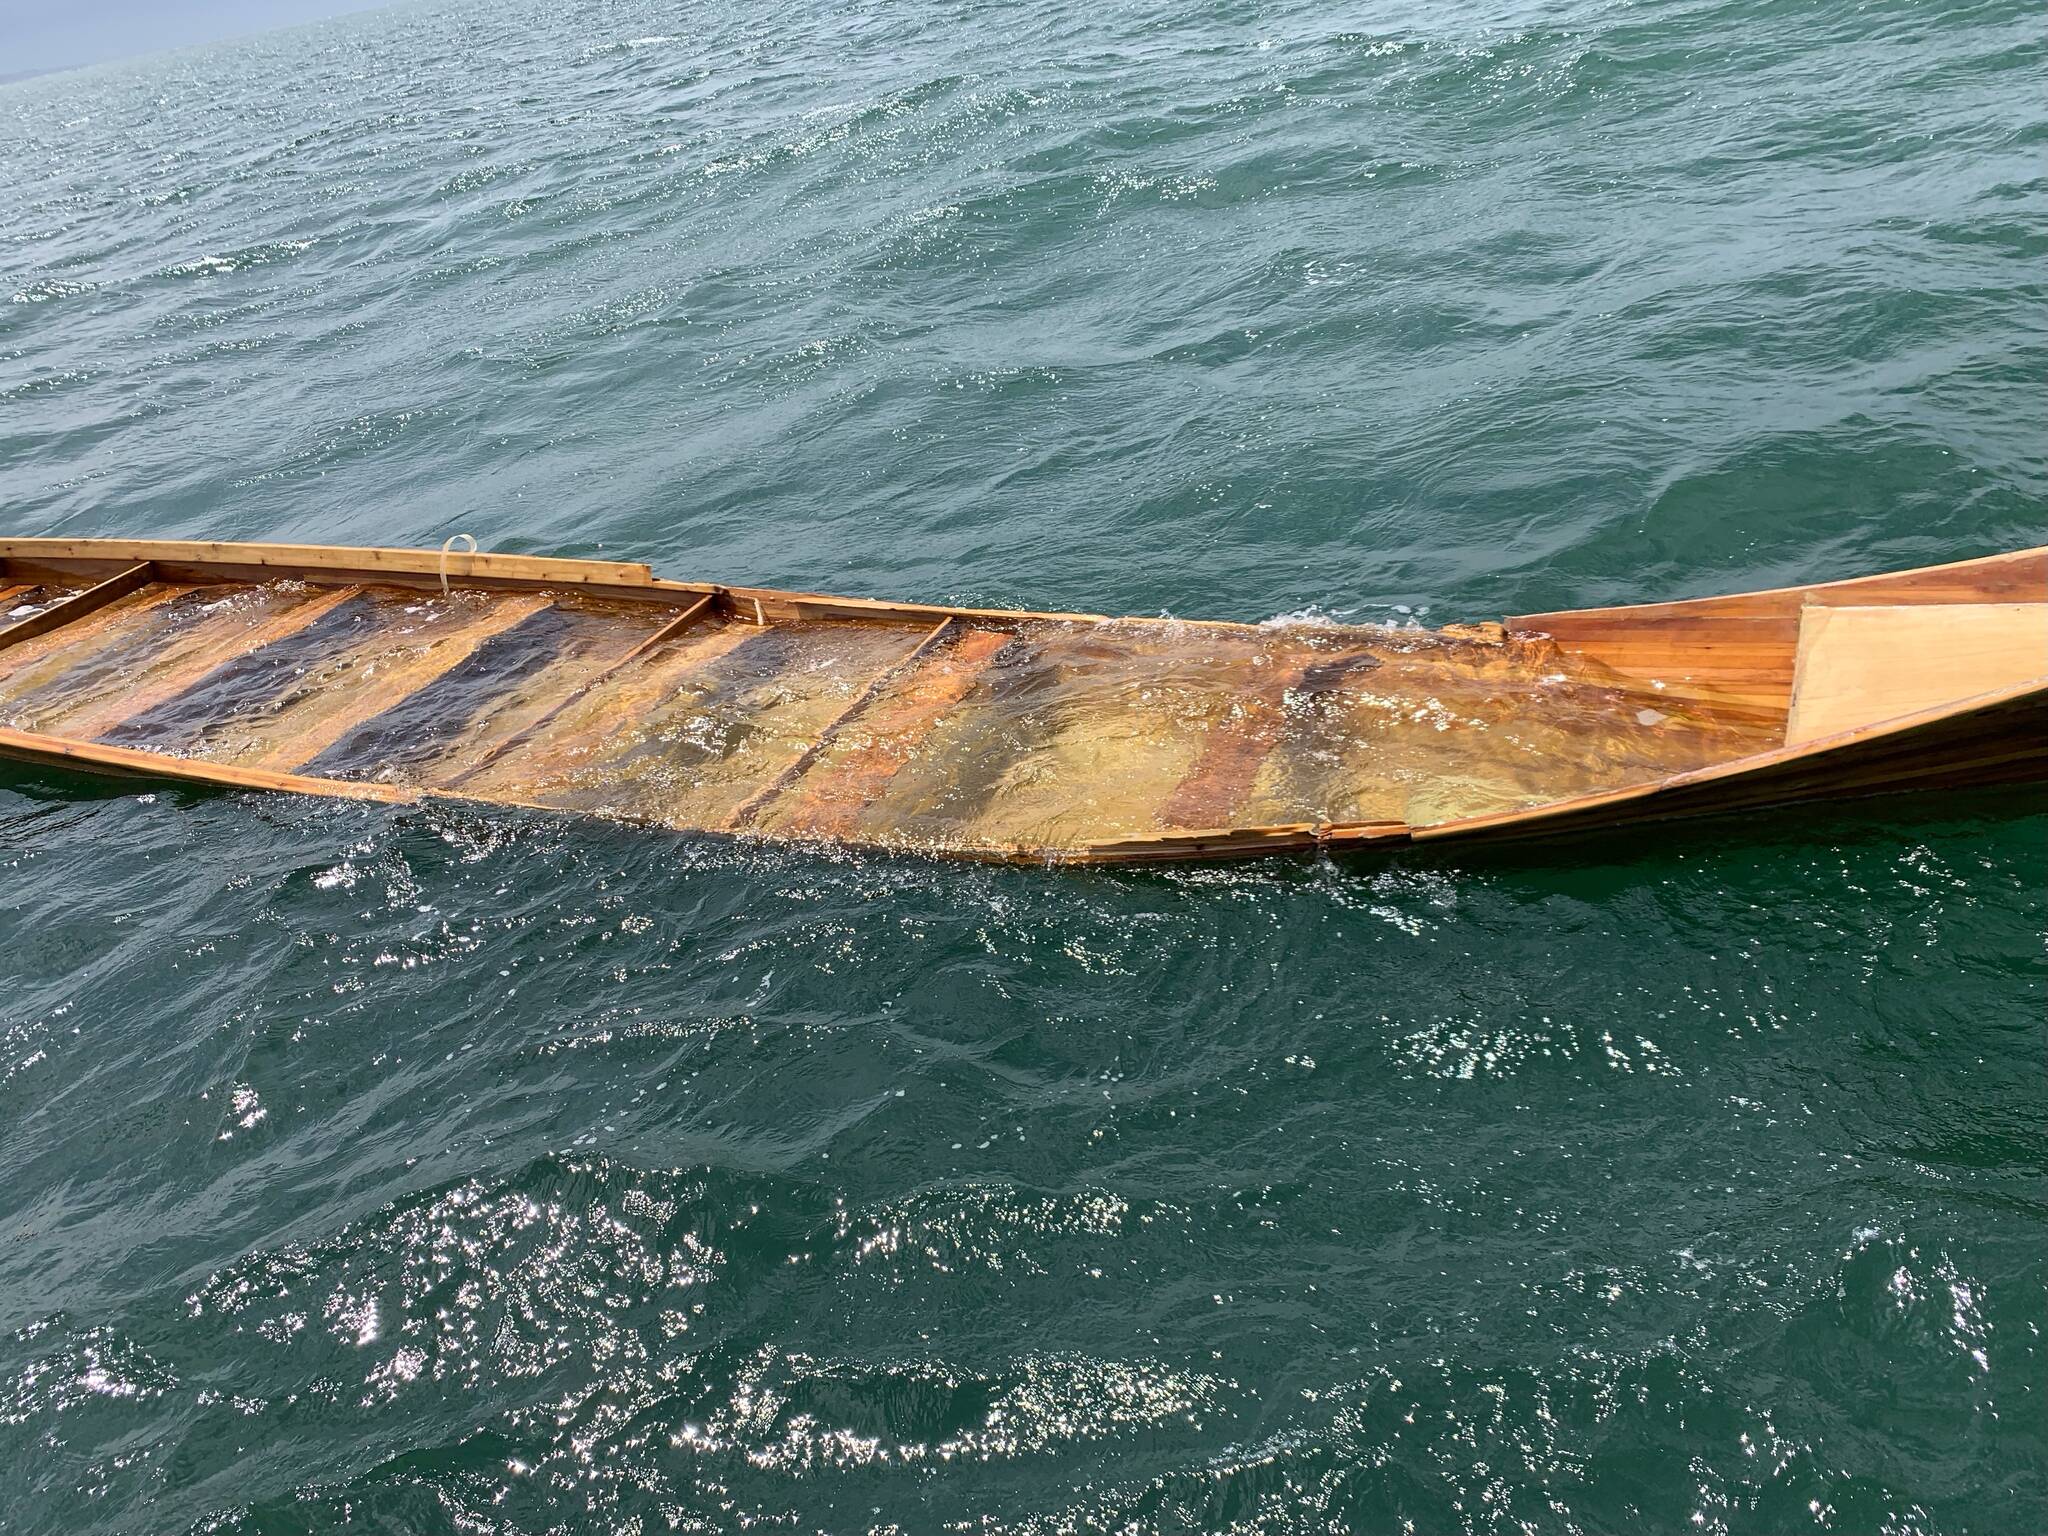 Photo provided
The 40-foot cedar canoe, made by a member of the Lummi Nation, was found mostly submerged in the Salish Sea.